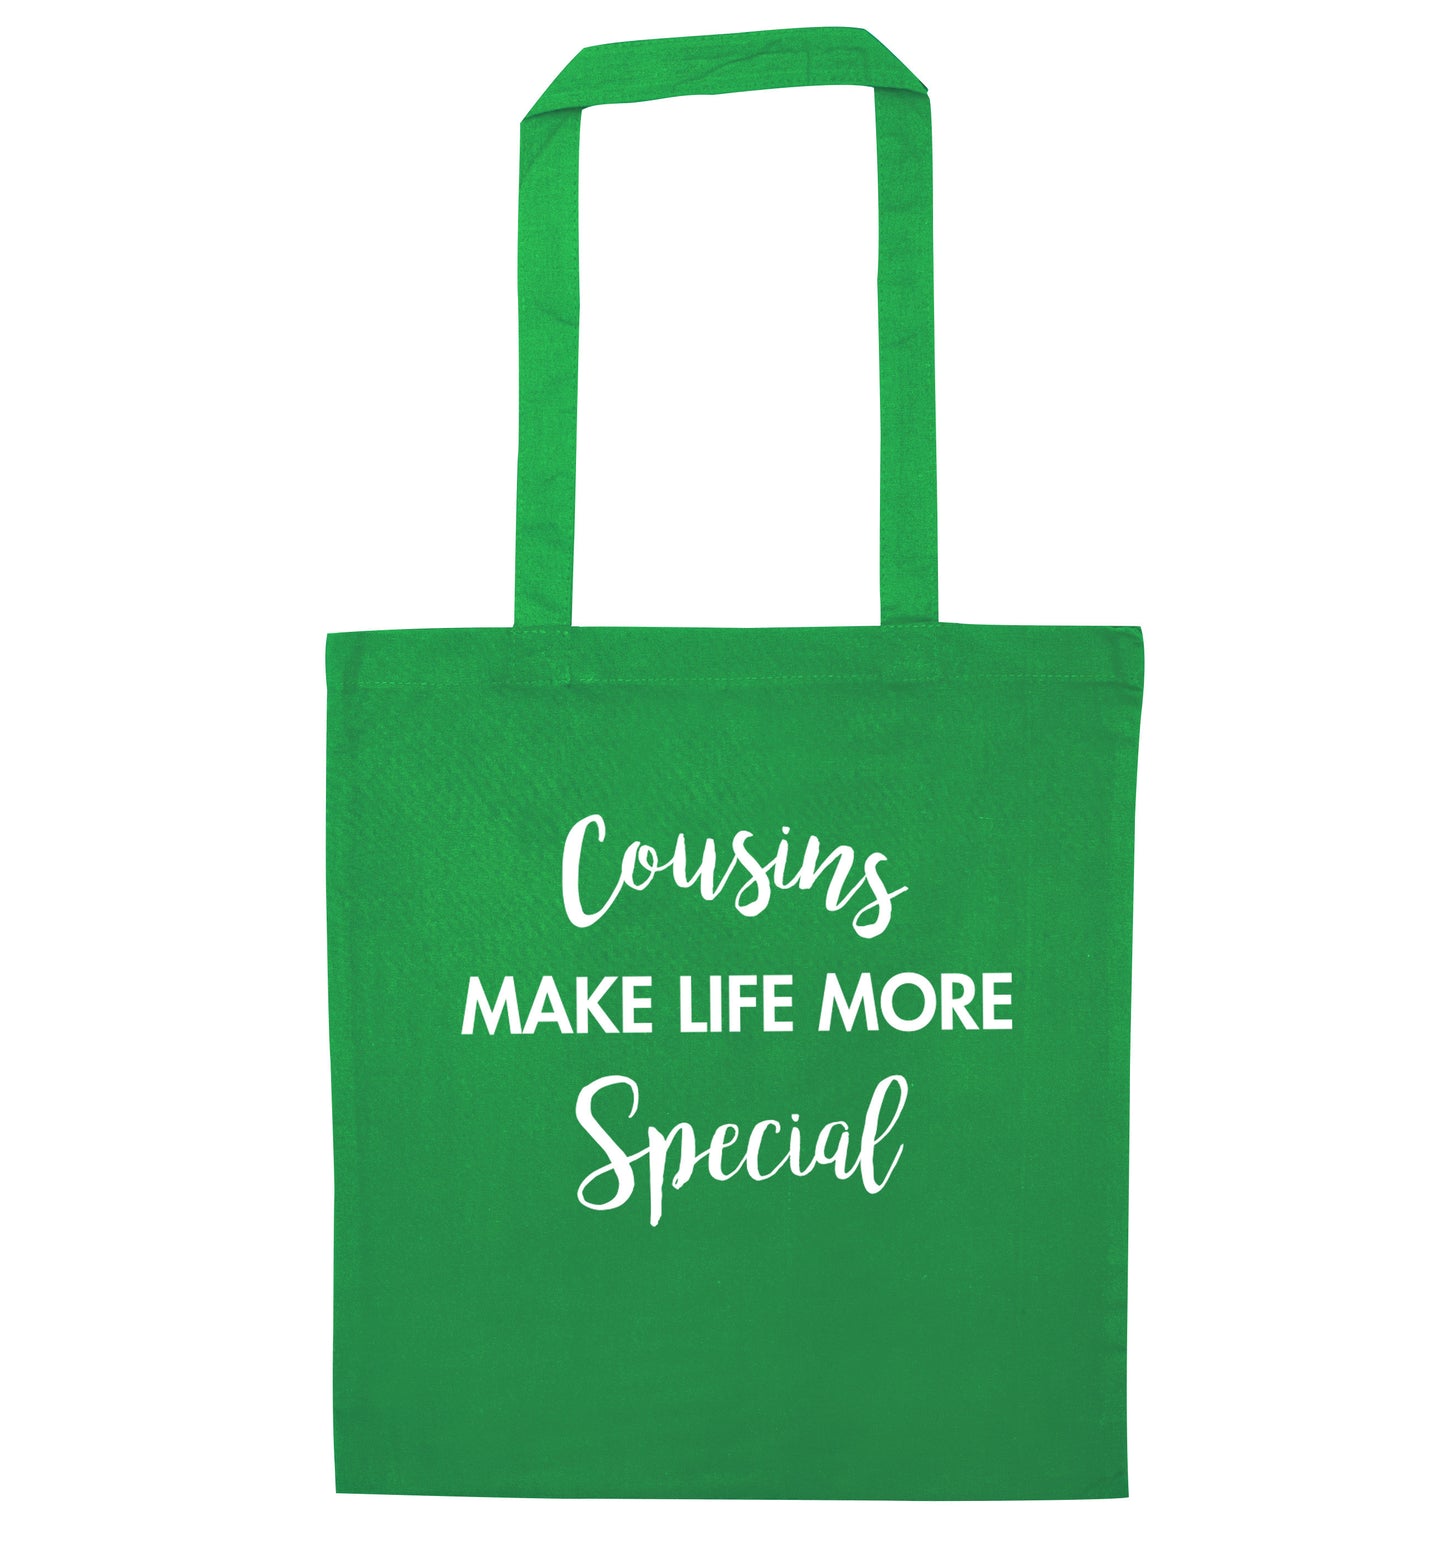 Cousins make life more special green tote bag